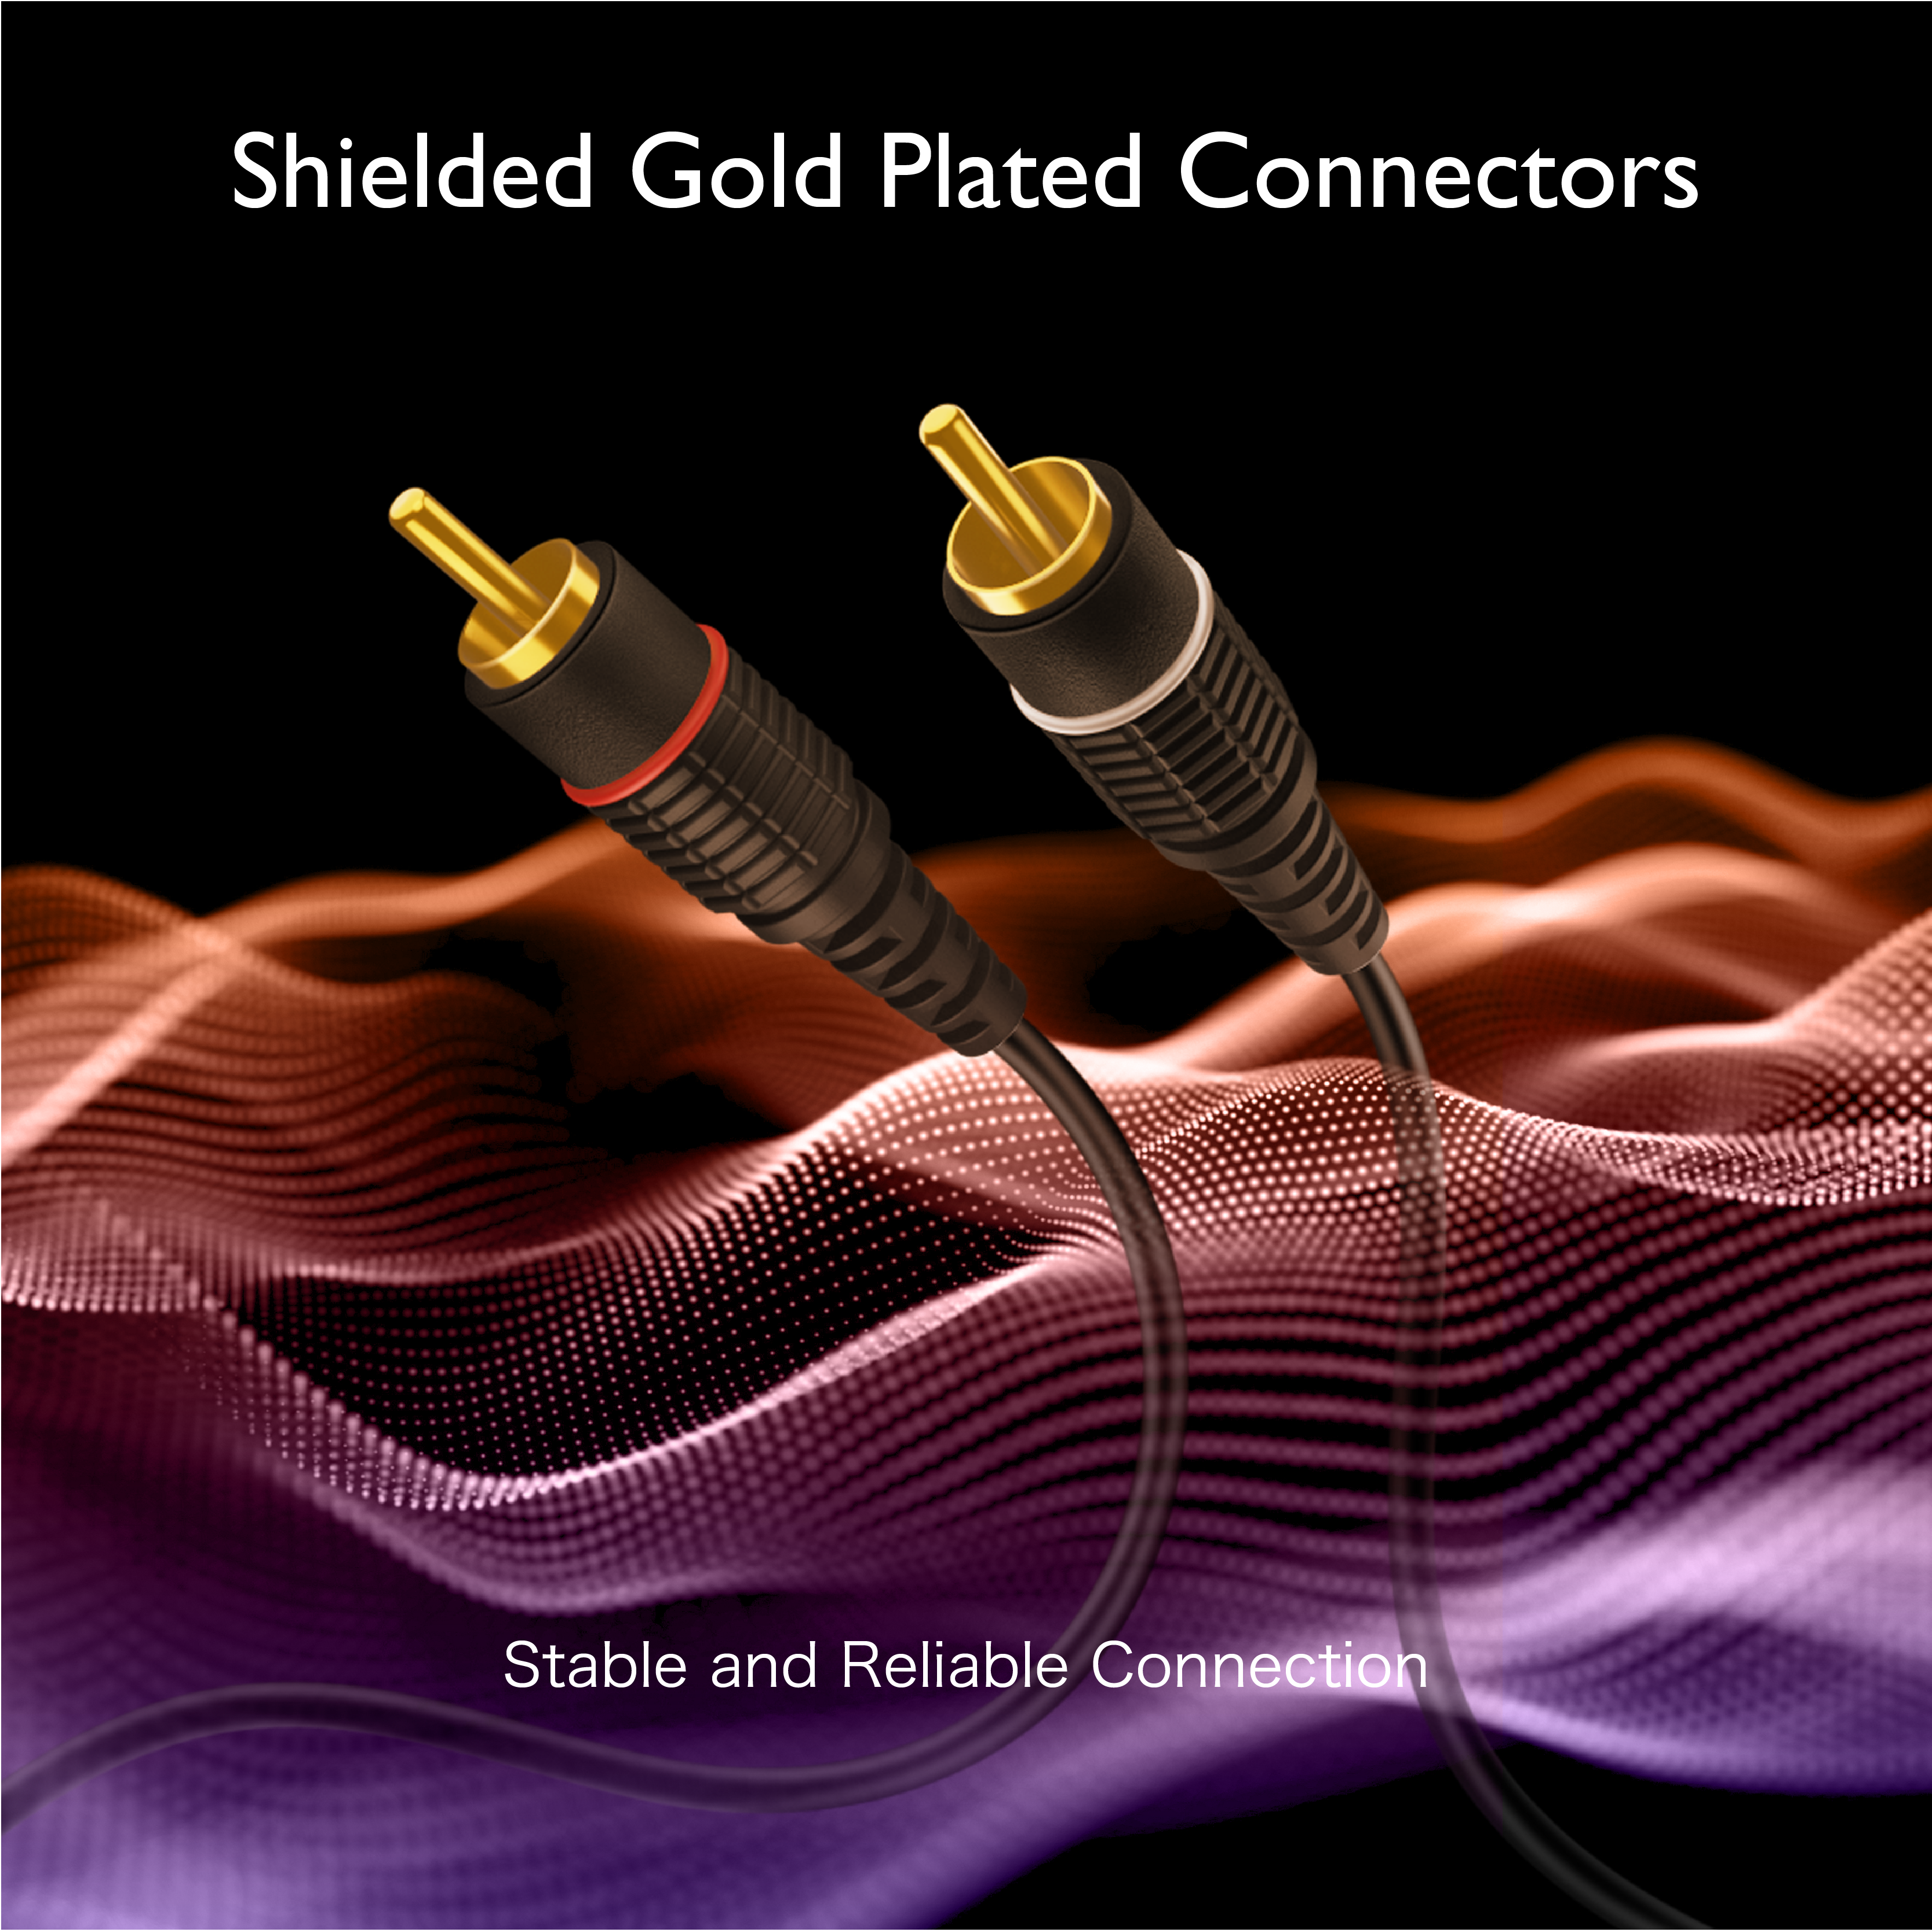 2RCA Stereo Audio Cable (25 Feet) - Dual RCA Plug M/M 2 Channel (Right and Left) Gold Plated Dual Shielded RCA to RCA Male Connectors Black - image 5 of 6